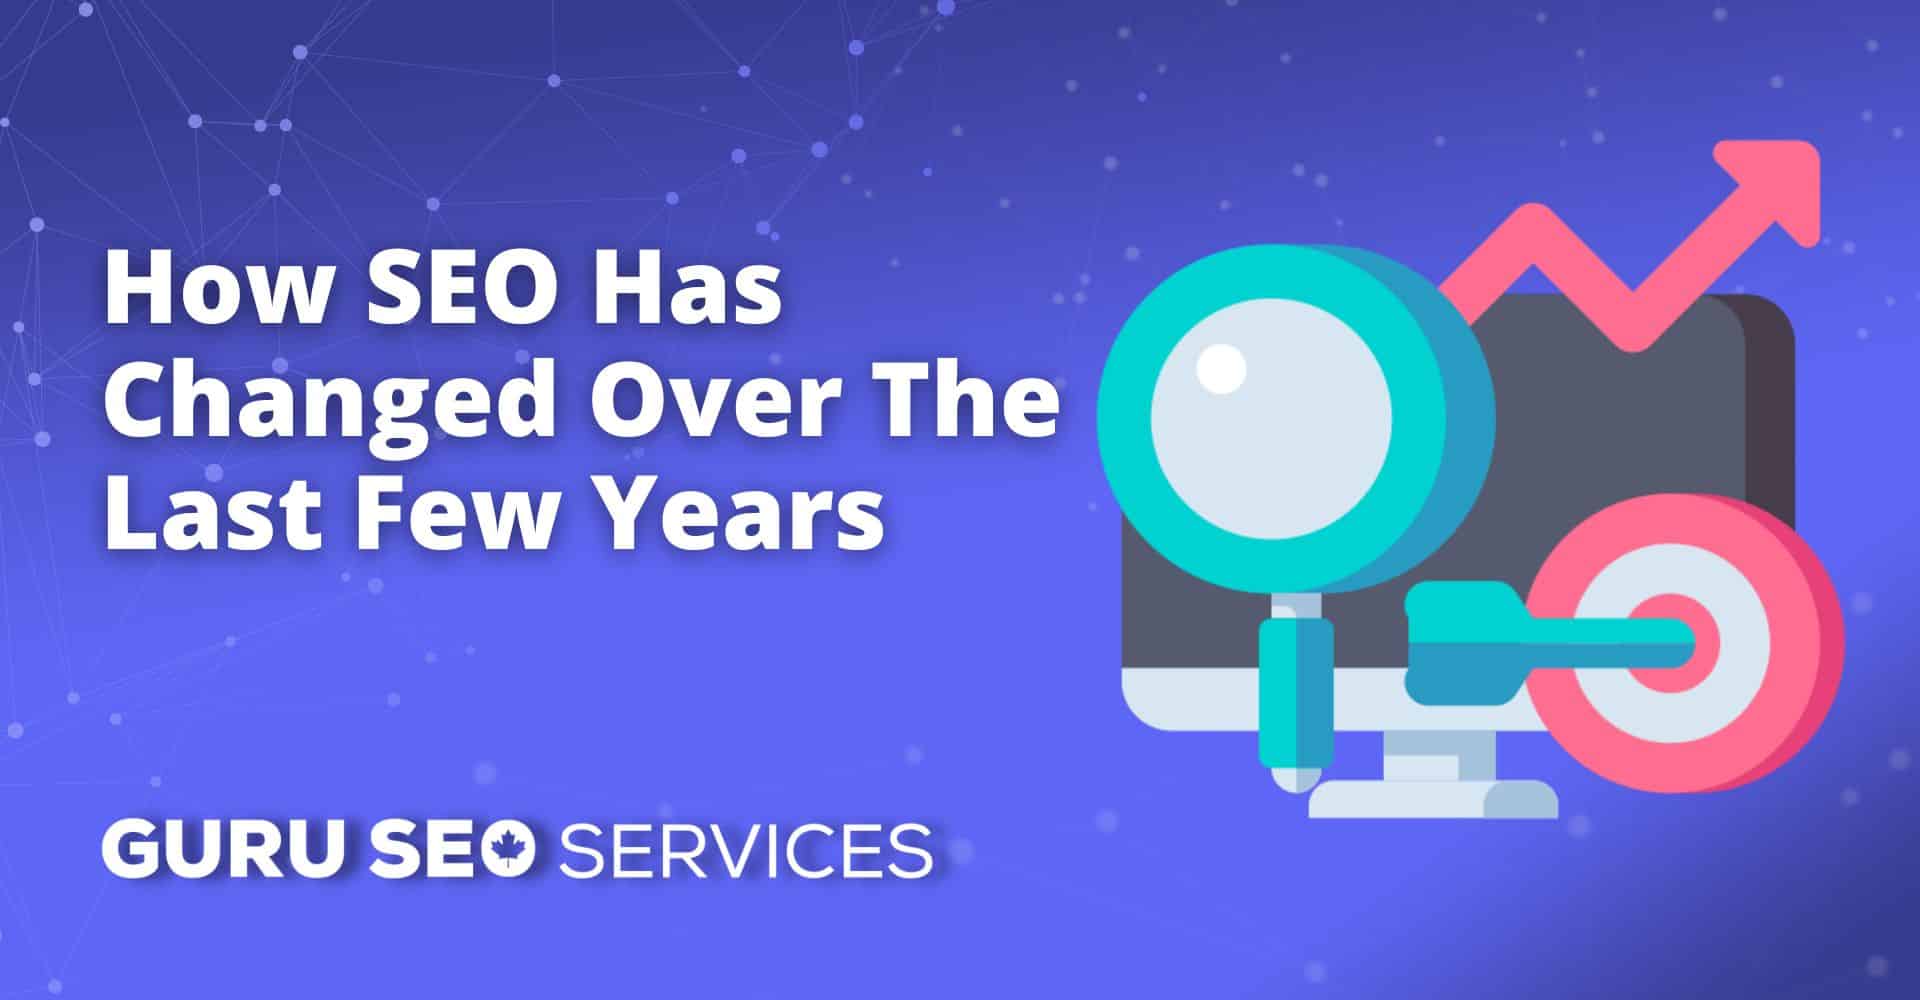 Explore how SEO has evolved over the past few years with a focus on web design and SEO services.